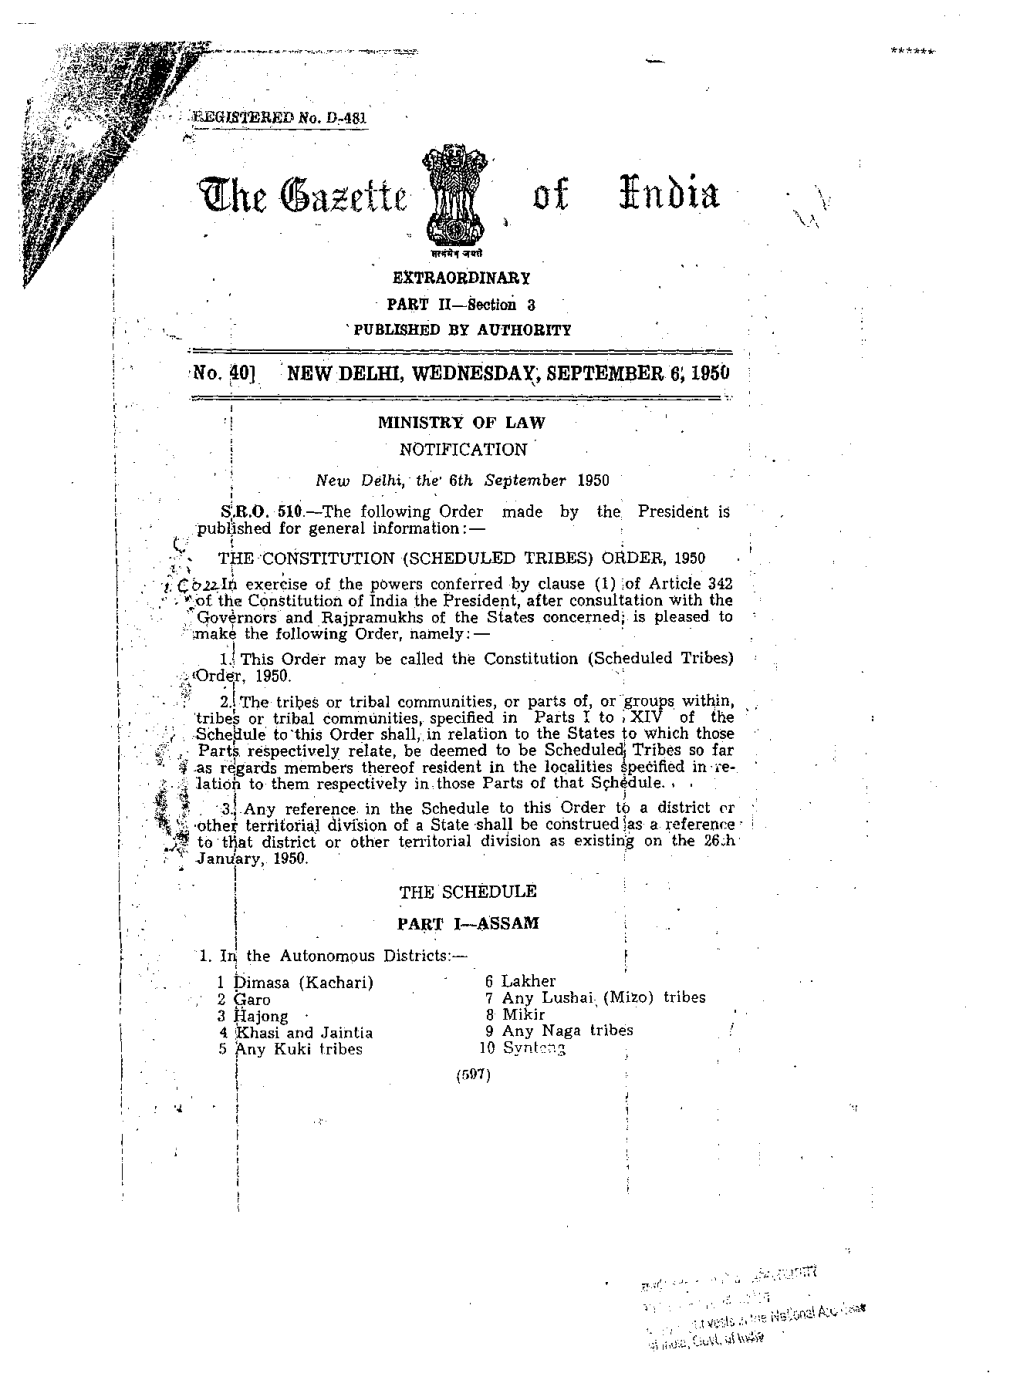 The Constitution (Scheduled Tribes) Order, 1950